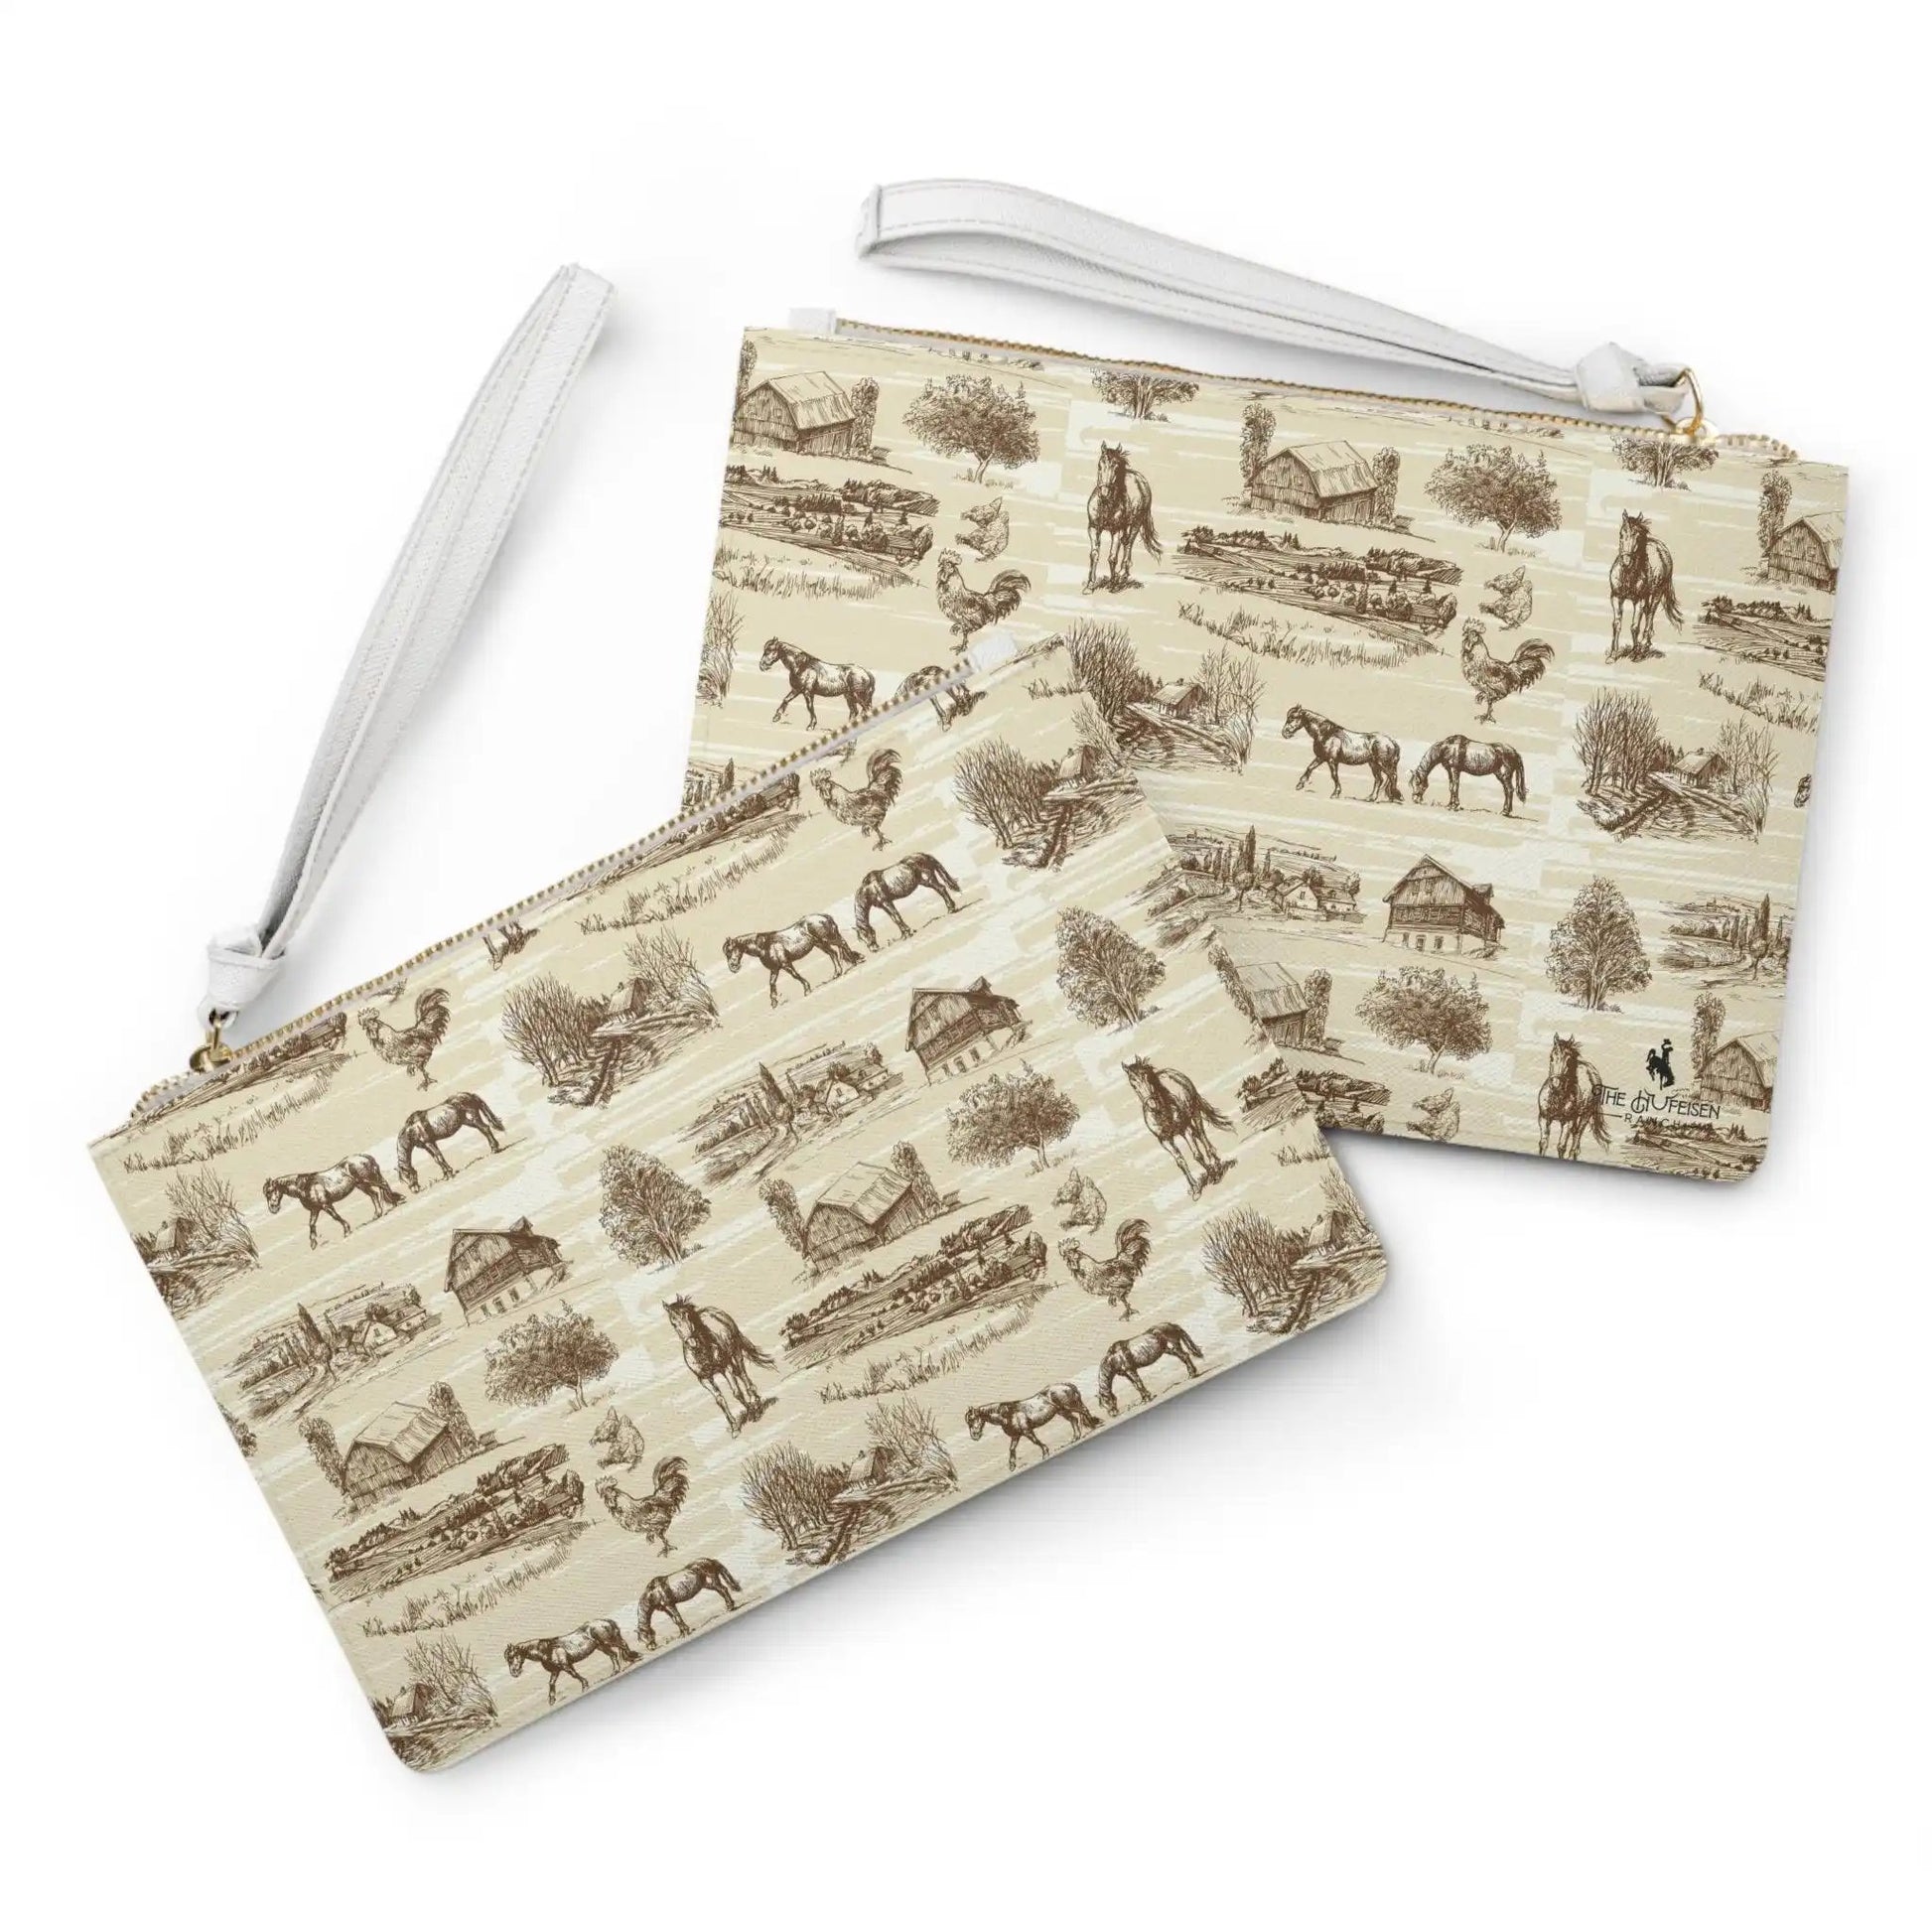 Country Farm Clutch BagDesigned with a loop handle to quickly free your hands, this custom clutch bag is made for the fashionista on the go. It can hold everyday essentials such as a phoneCountry Farm Clutch BagThe Hufeisen-Ranch (WYO Wagyu)Bags